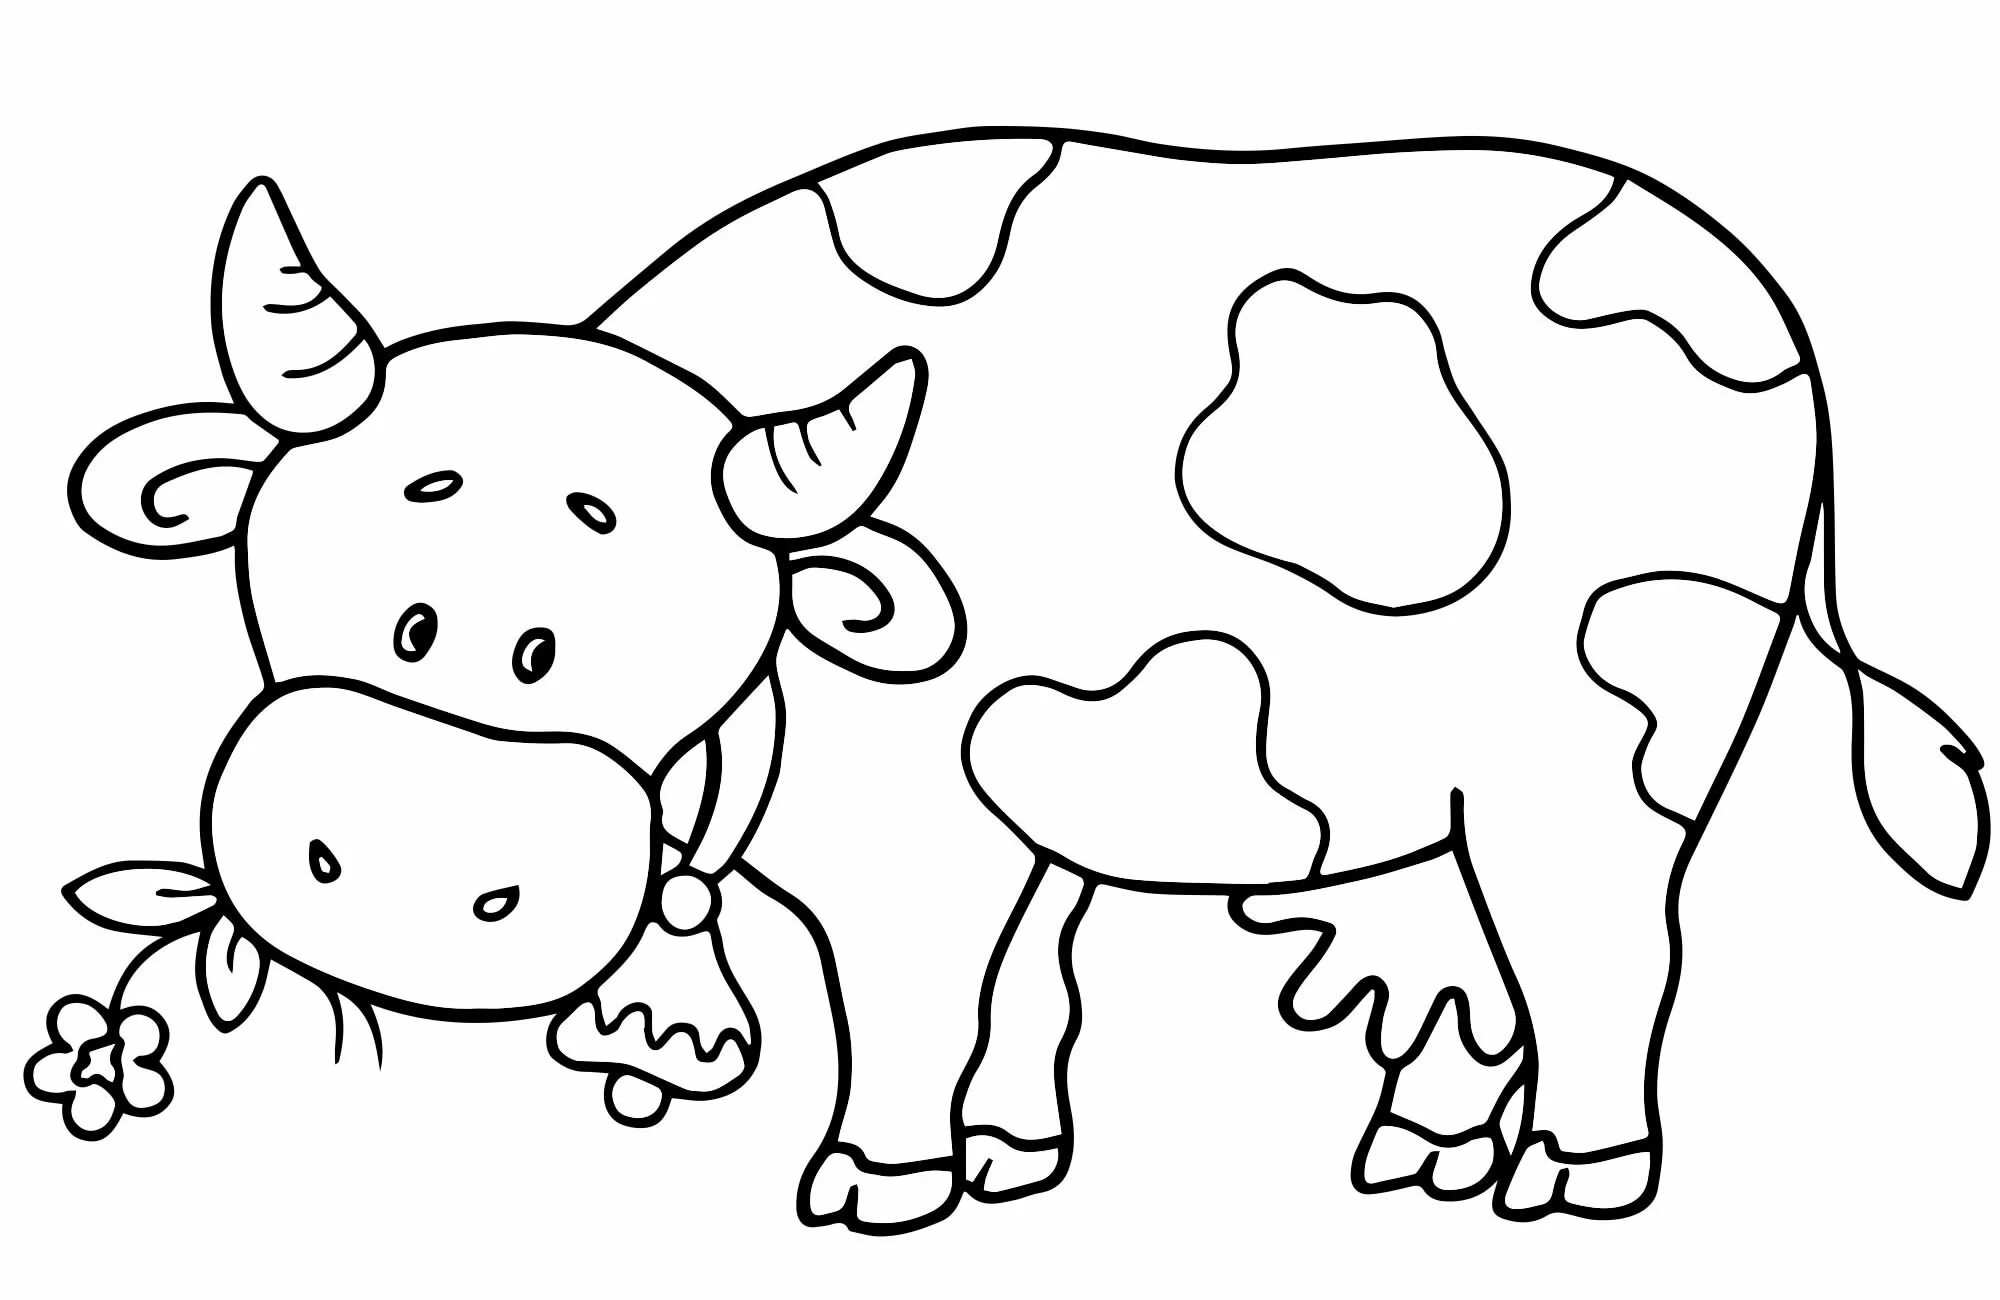 Innovative cow coloring book for toddlers 2 3 years old